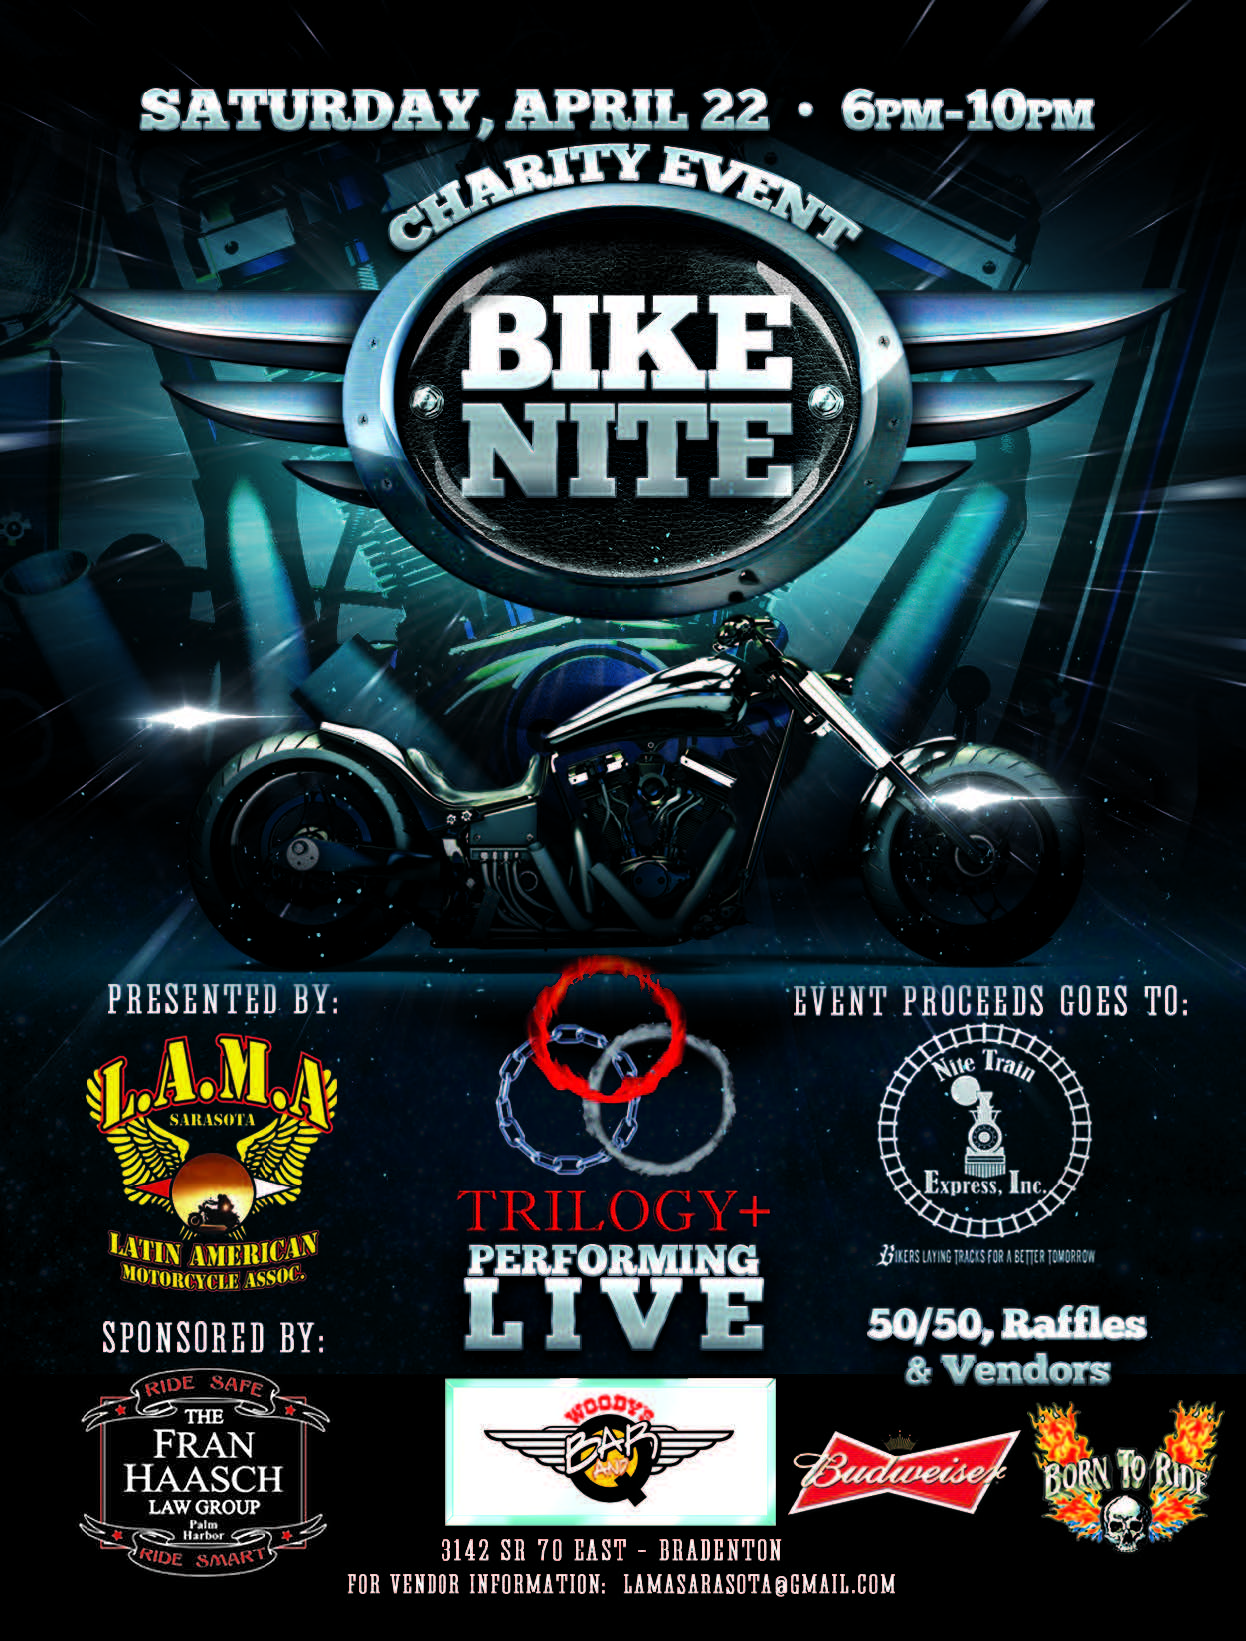 Charity Bike Nite at Woody’s Bar & Grill Born To Ride Motorcycle